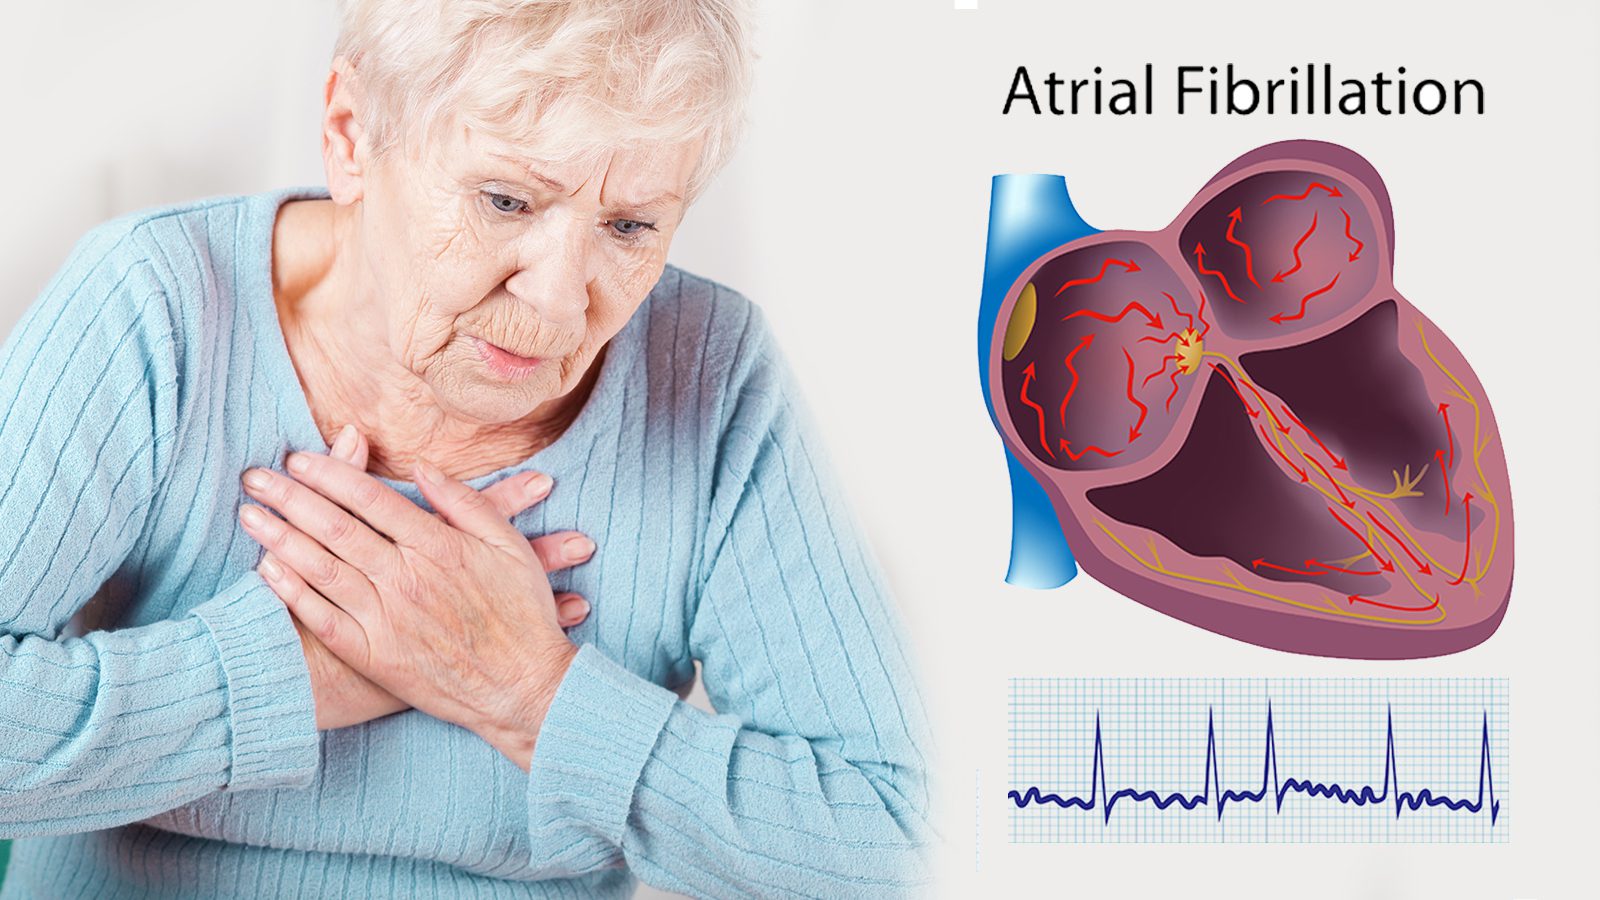 Vitamin D May Protect You From Atrial Fibrillation. According to Science